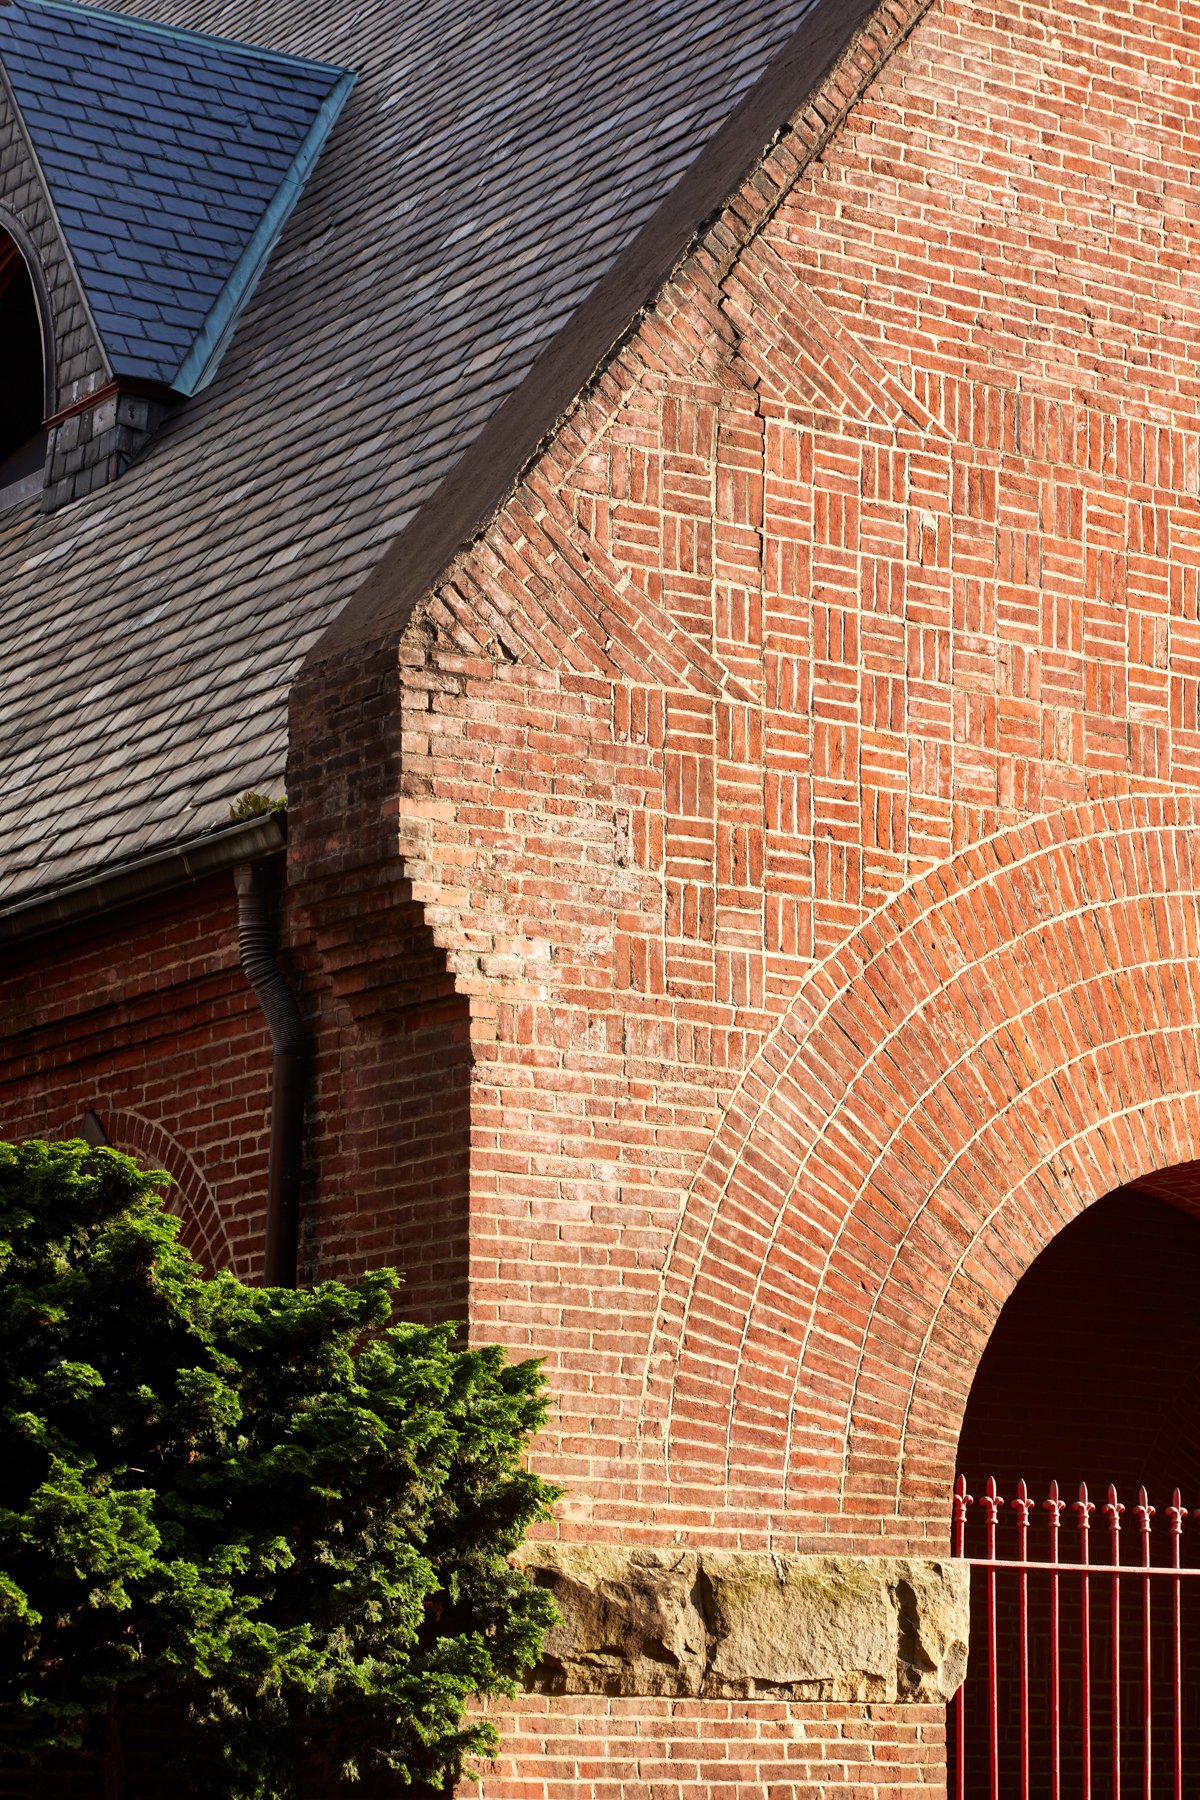   “The brickwork designs are richer than any Richardson had designed before, which shows his trust in the skilled Pittsburgh laborers who executed them.”         Henry H. Richardson  Emmanuel Episcopal Church 